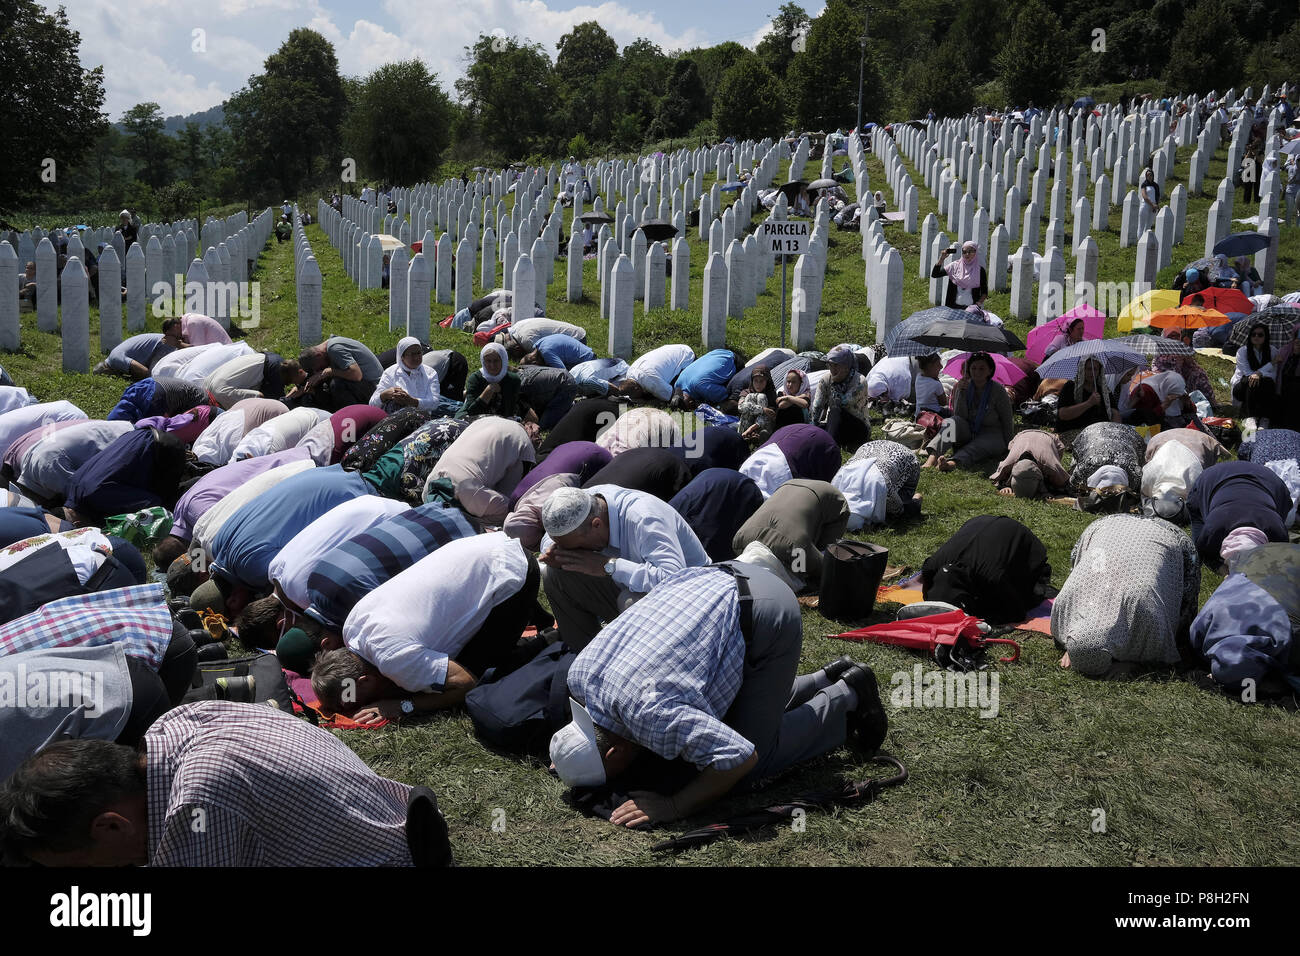 July 10, 2018 - Srebrenica, Bosnia - Twenty-three years have passed since the Srebrenica Genocide took the lives of more than 7000 victims in Bosnia and Herzegovina between 1992 and 1995. This horrific event is commemorated annually on July 10 because on that day in 1995 Bosnian Serb forces, commanded by convicted war criminal General R. Mladic, executed more than 7000 Muslim-Bosniak men, boys and elderly who had sought safety in the region after the fall of Srebrenica. Furthermore, another 25,000 people were forcibly deported in an UN-assisted ethnic cleansing that was later referred to by th Stock Photo